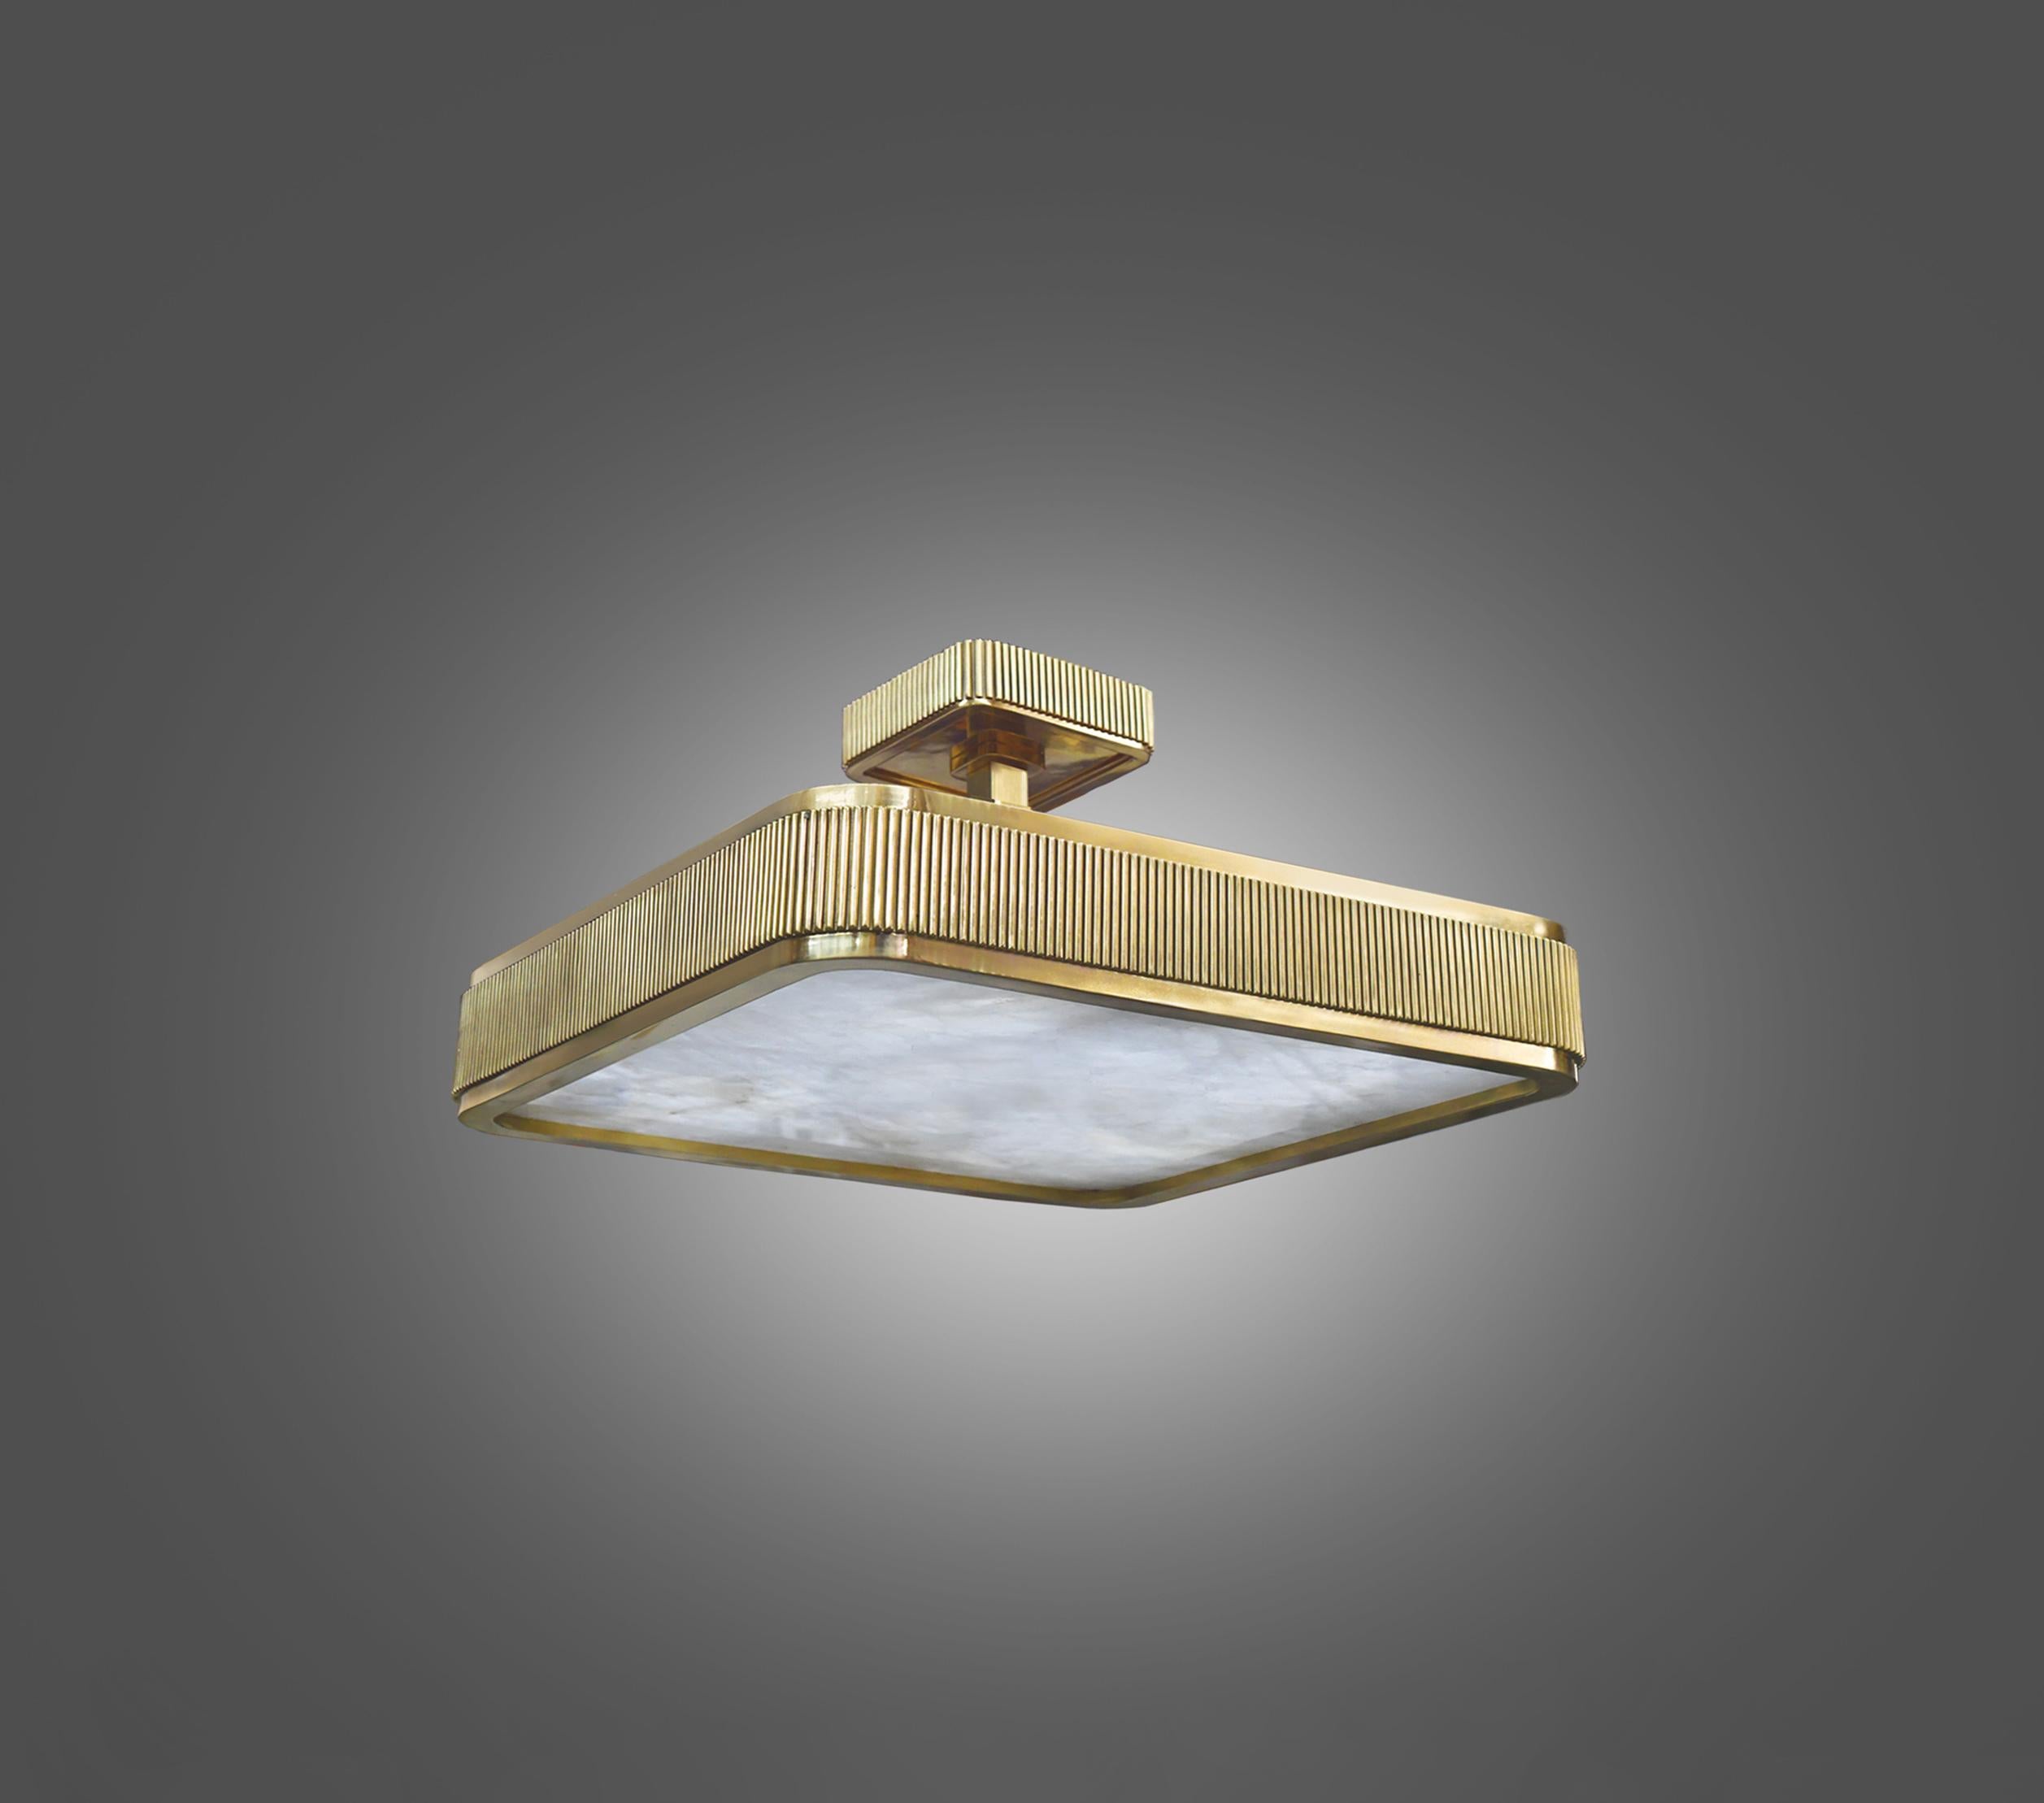 Elegant form polished brass frame with rock crystal panel, BSO rock crystal semi flushmount. Created by Phoenix, NYC.

Height can be adjustable.

Lutron dimmer system. 
Each fixture installs four E26 base sockets. 
Use four 60W each LED light bulb.